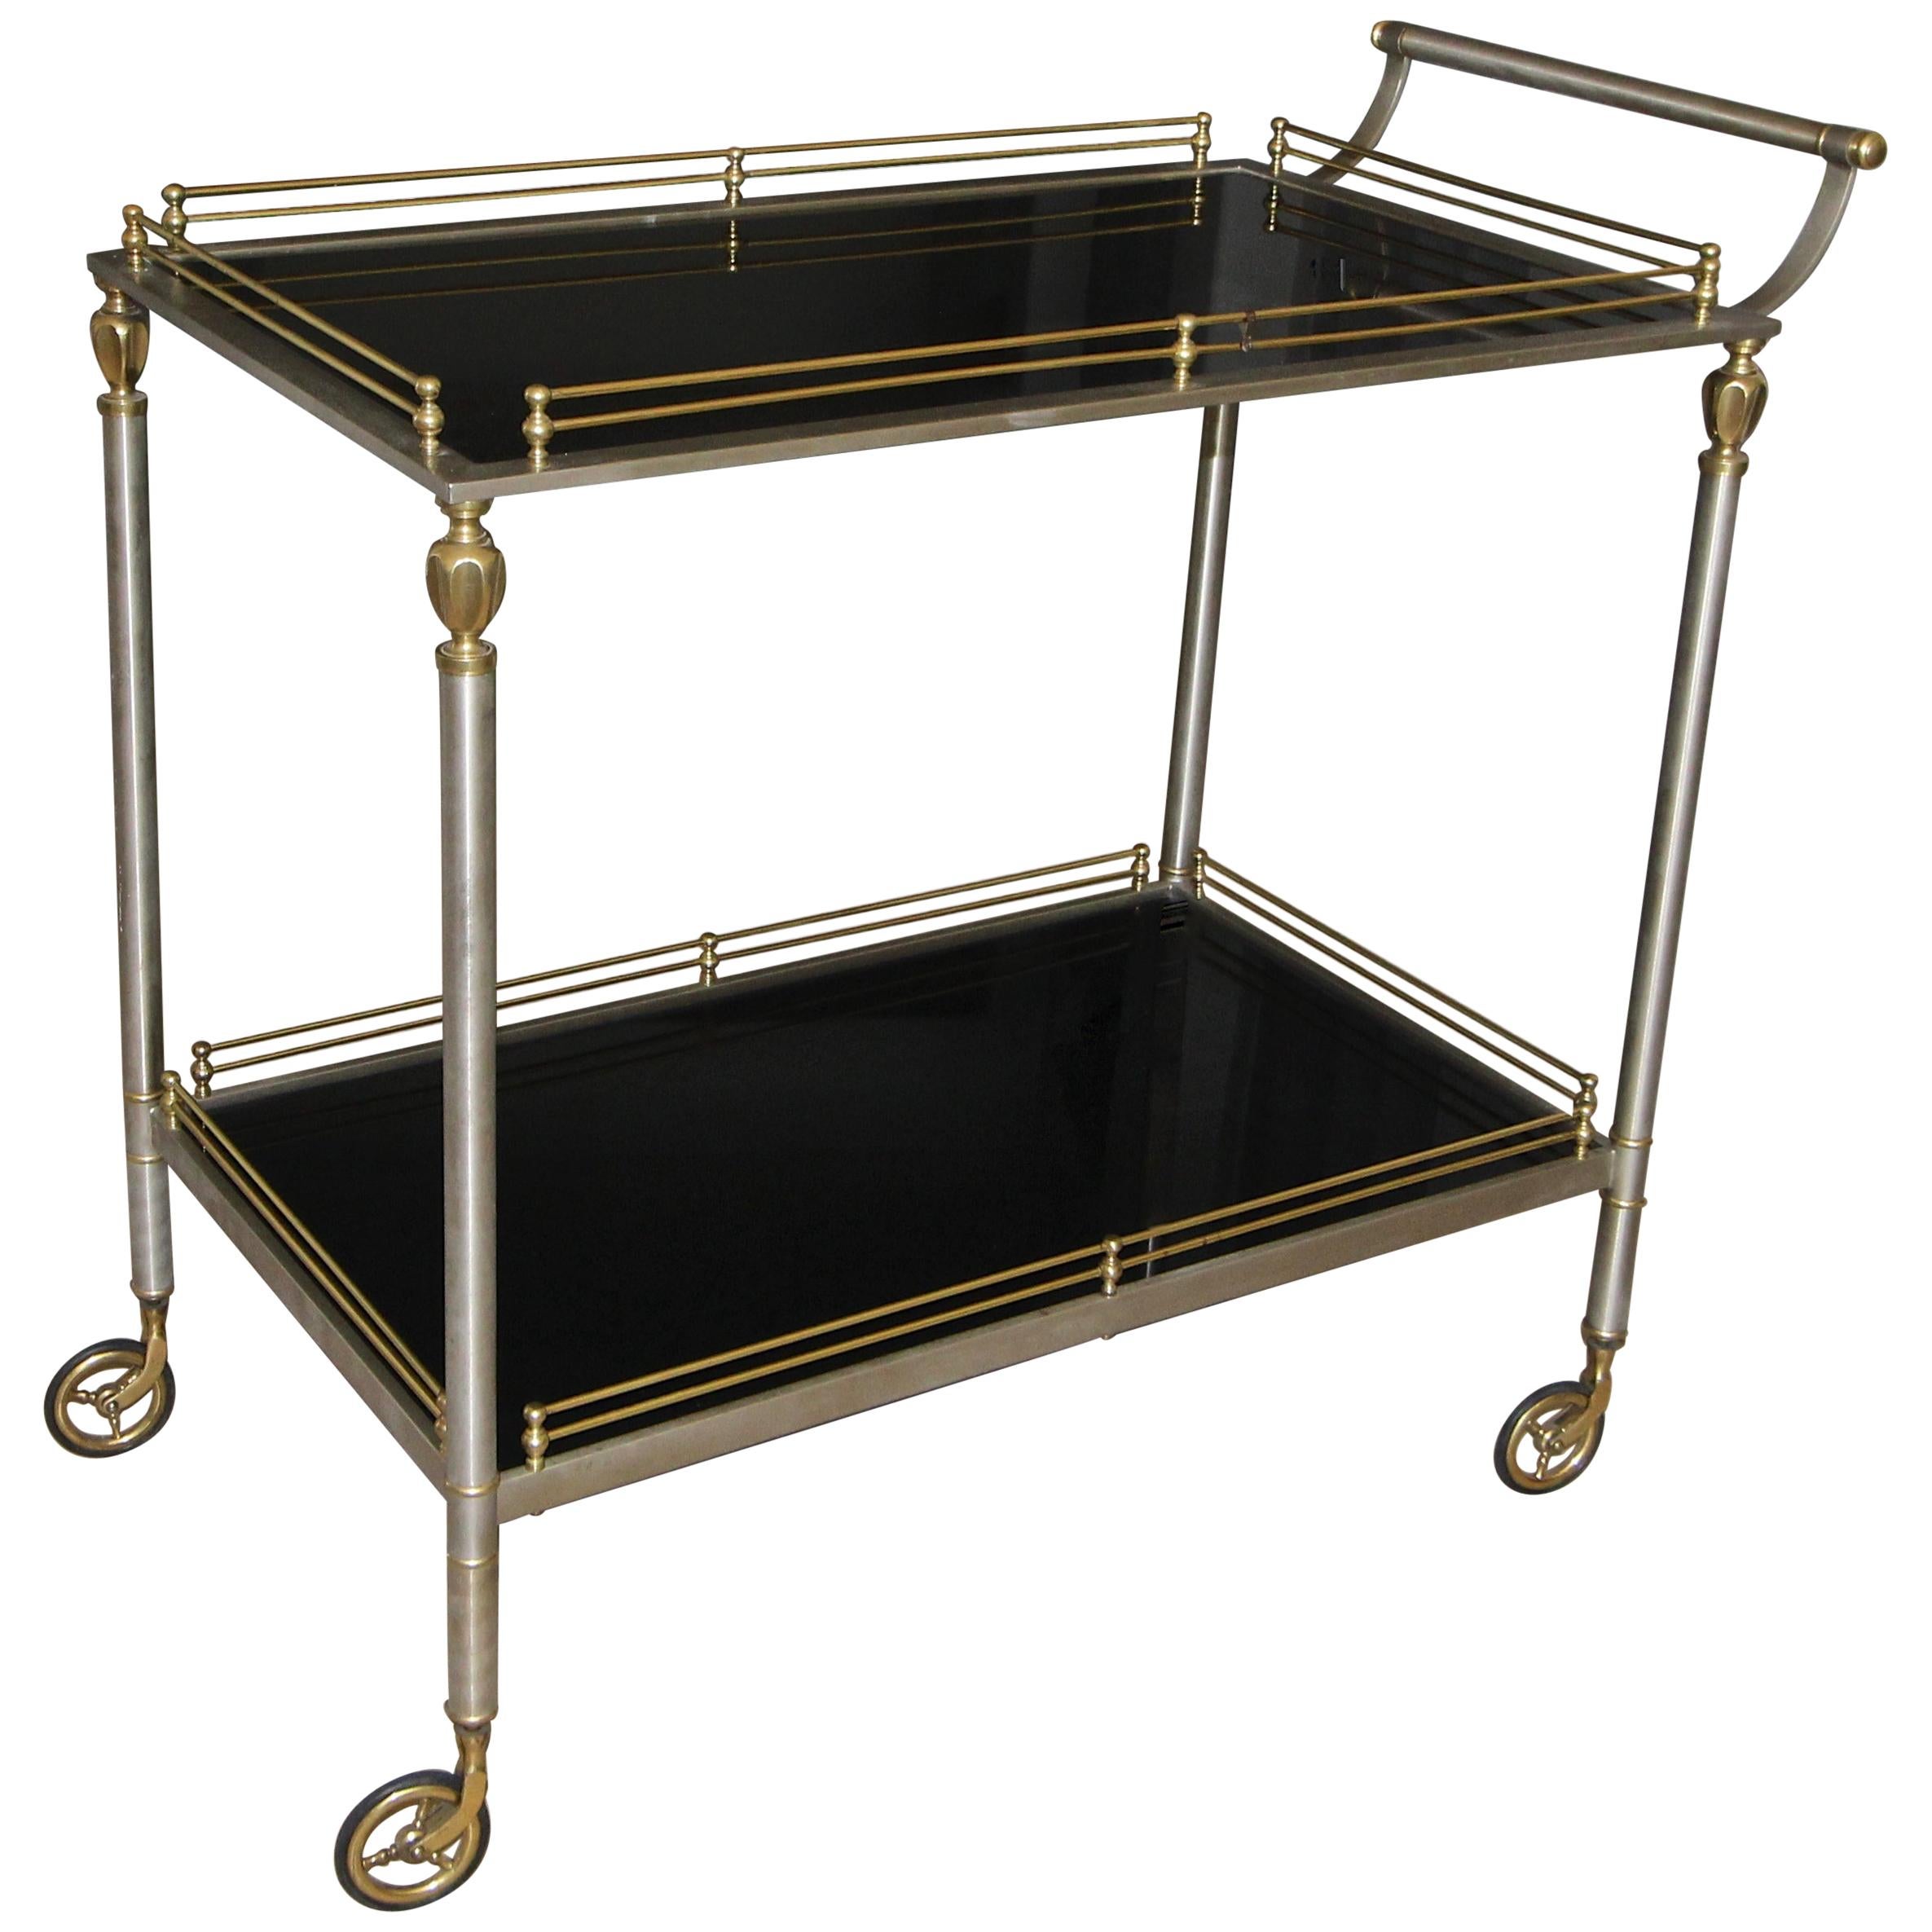 Large Italian Neoclassic Brass and Brushed Steel Bar or Tea Cart